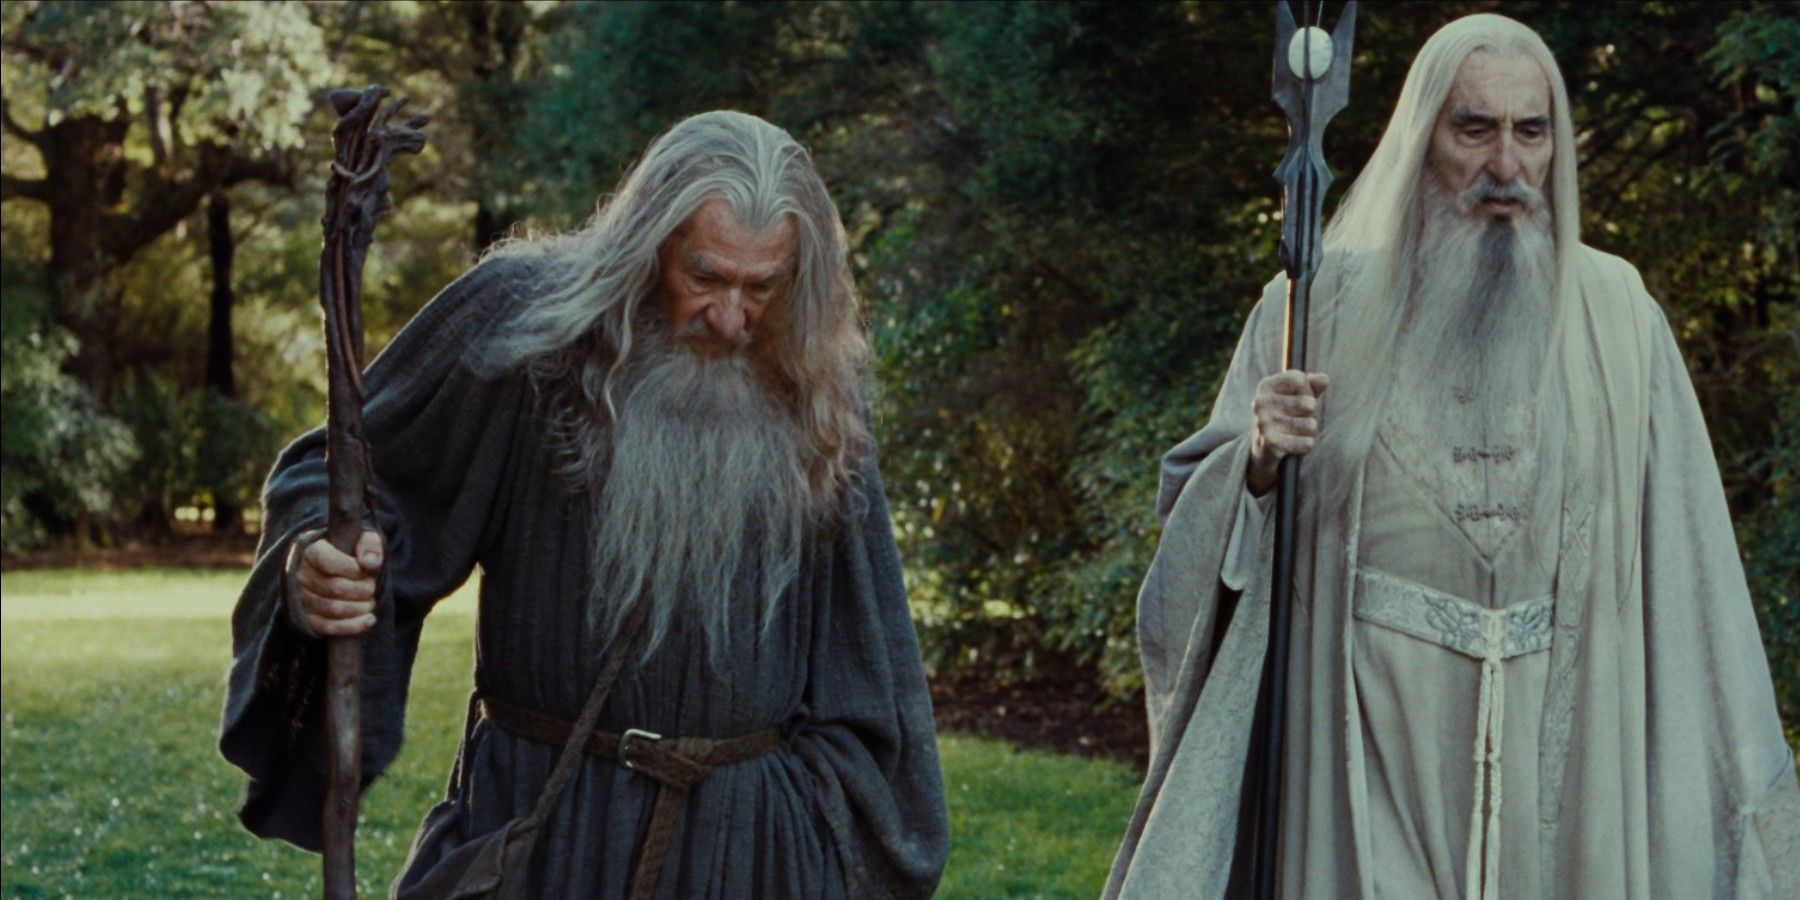 Ian McKellen as Gandalf and Christopher Lee as Saruman in Lord of the Rings The Fellowship of the Ring